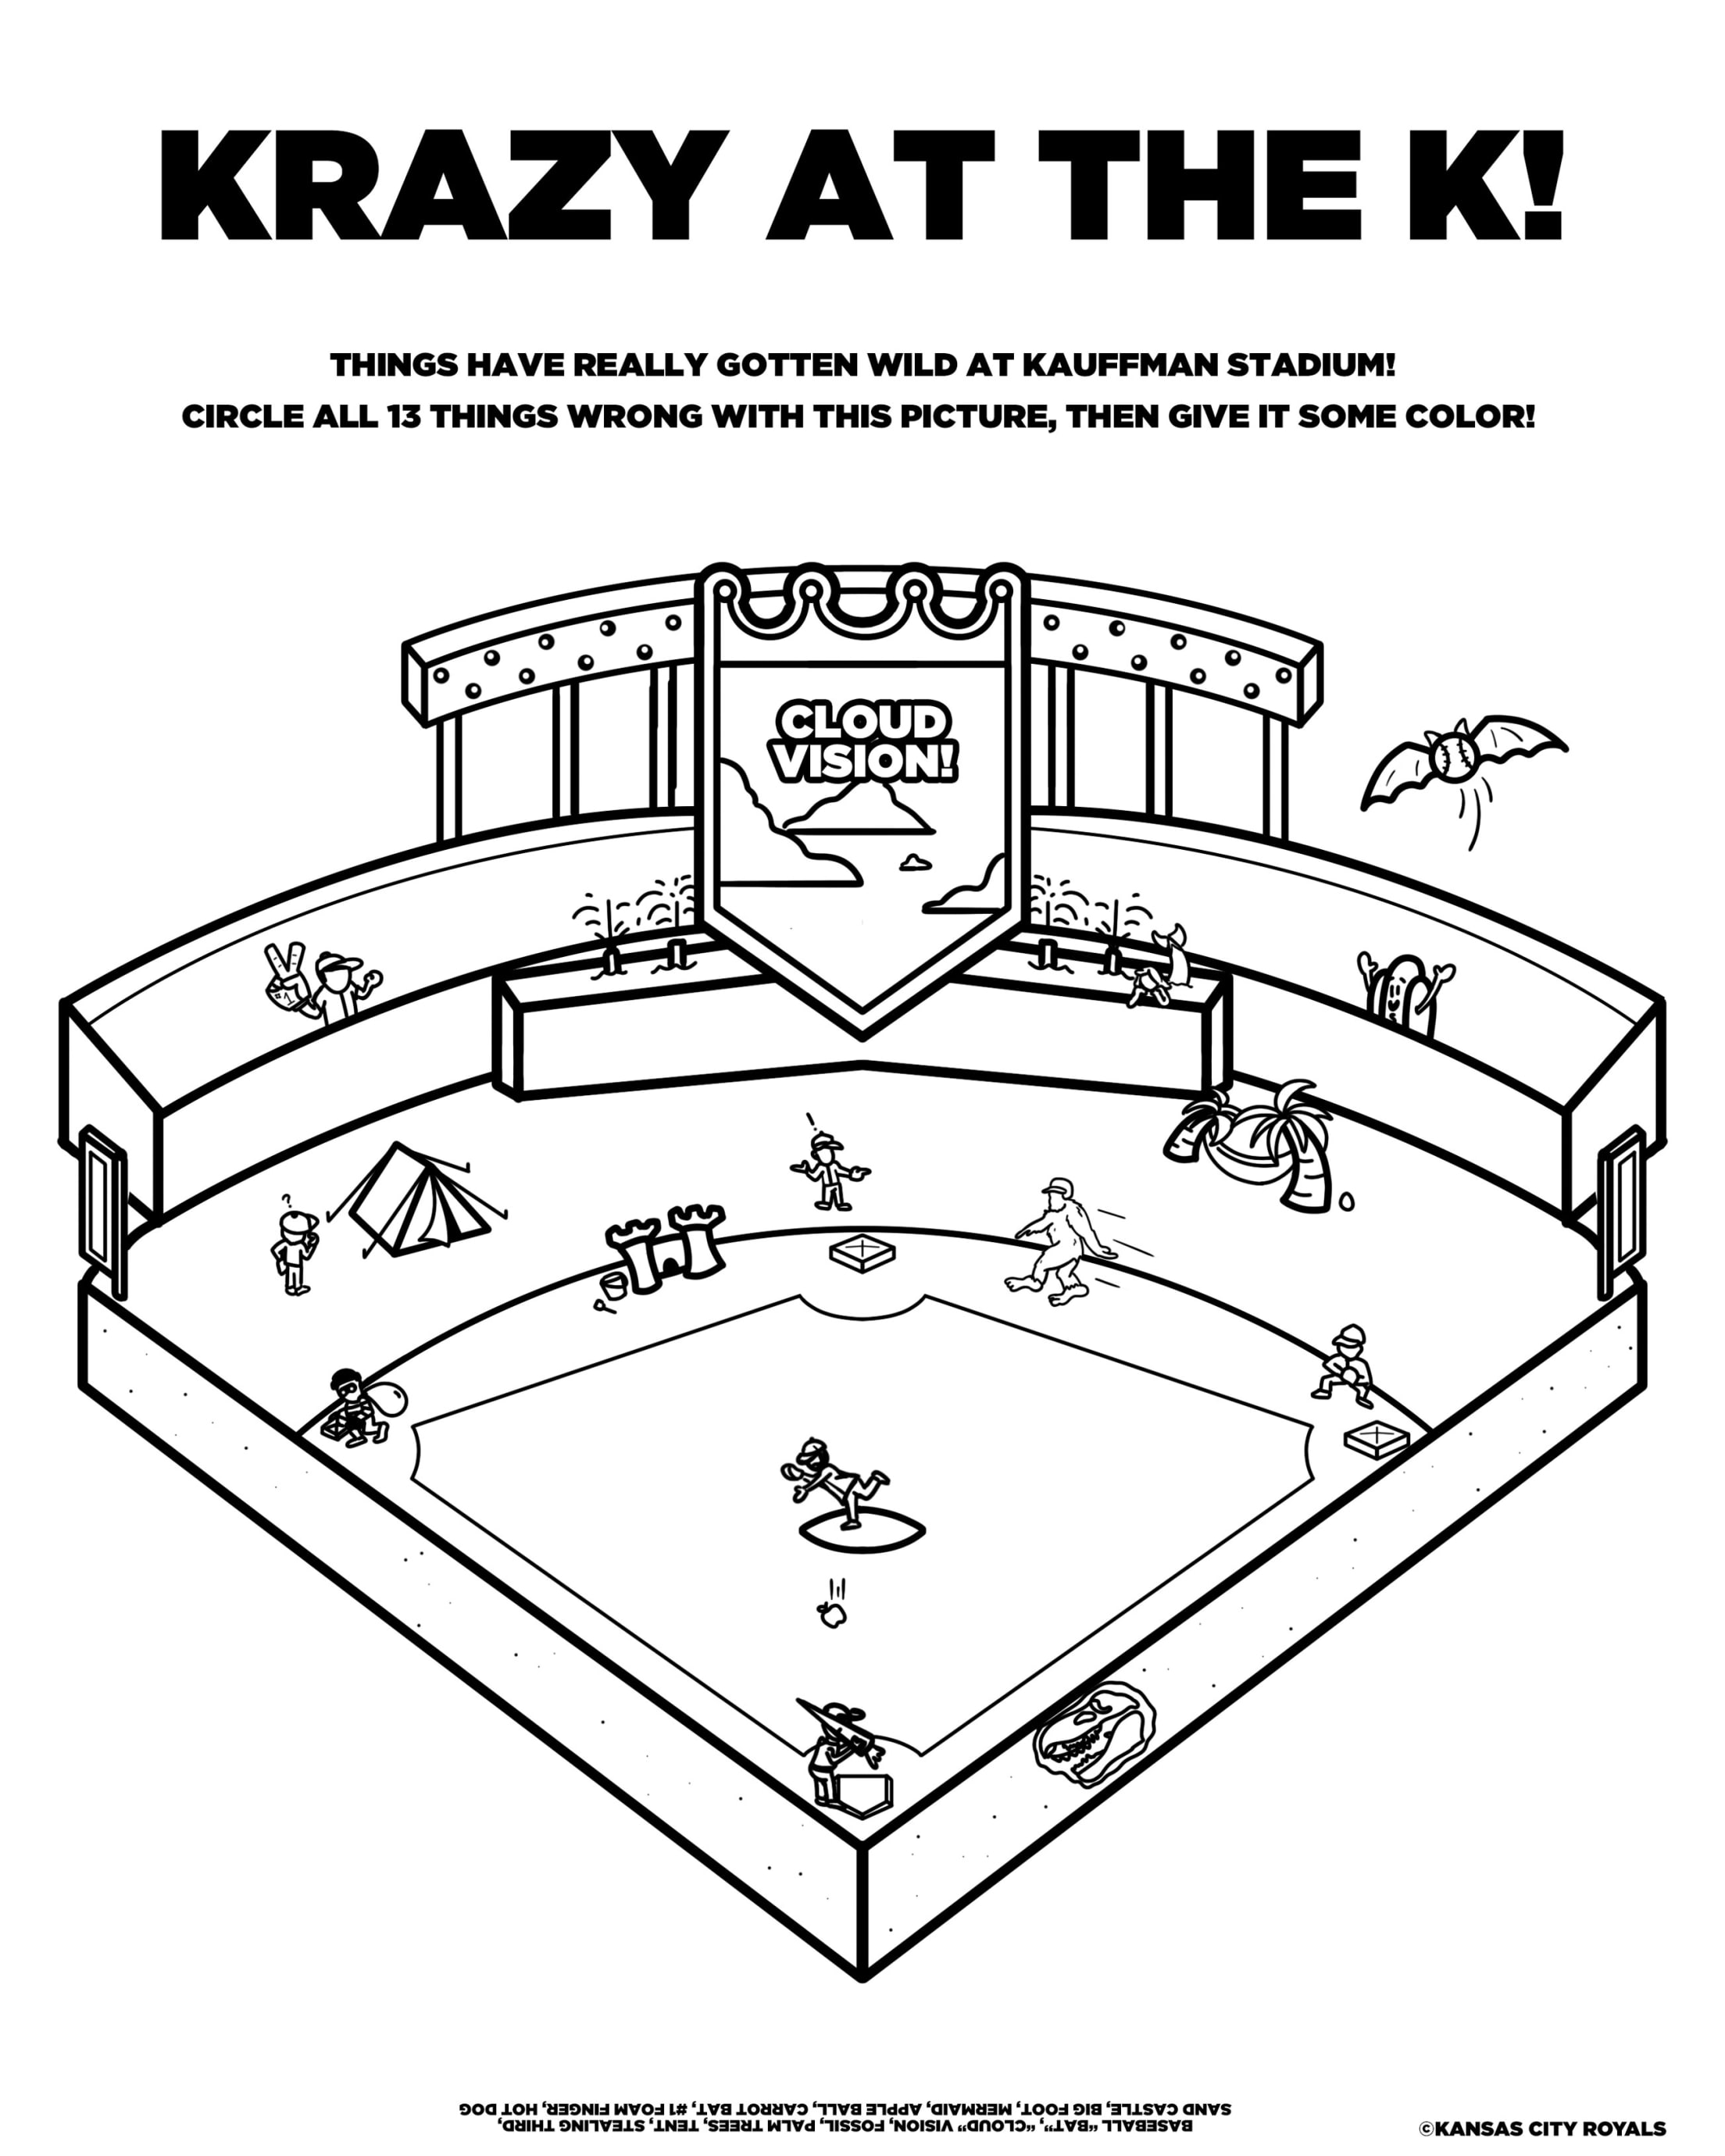 mlb coloring pages